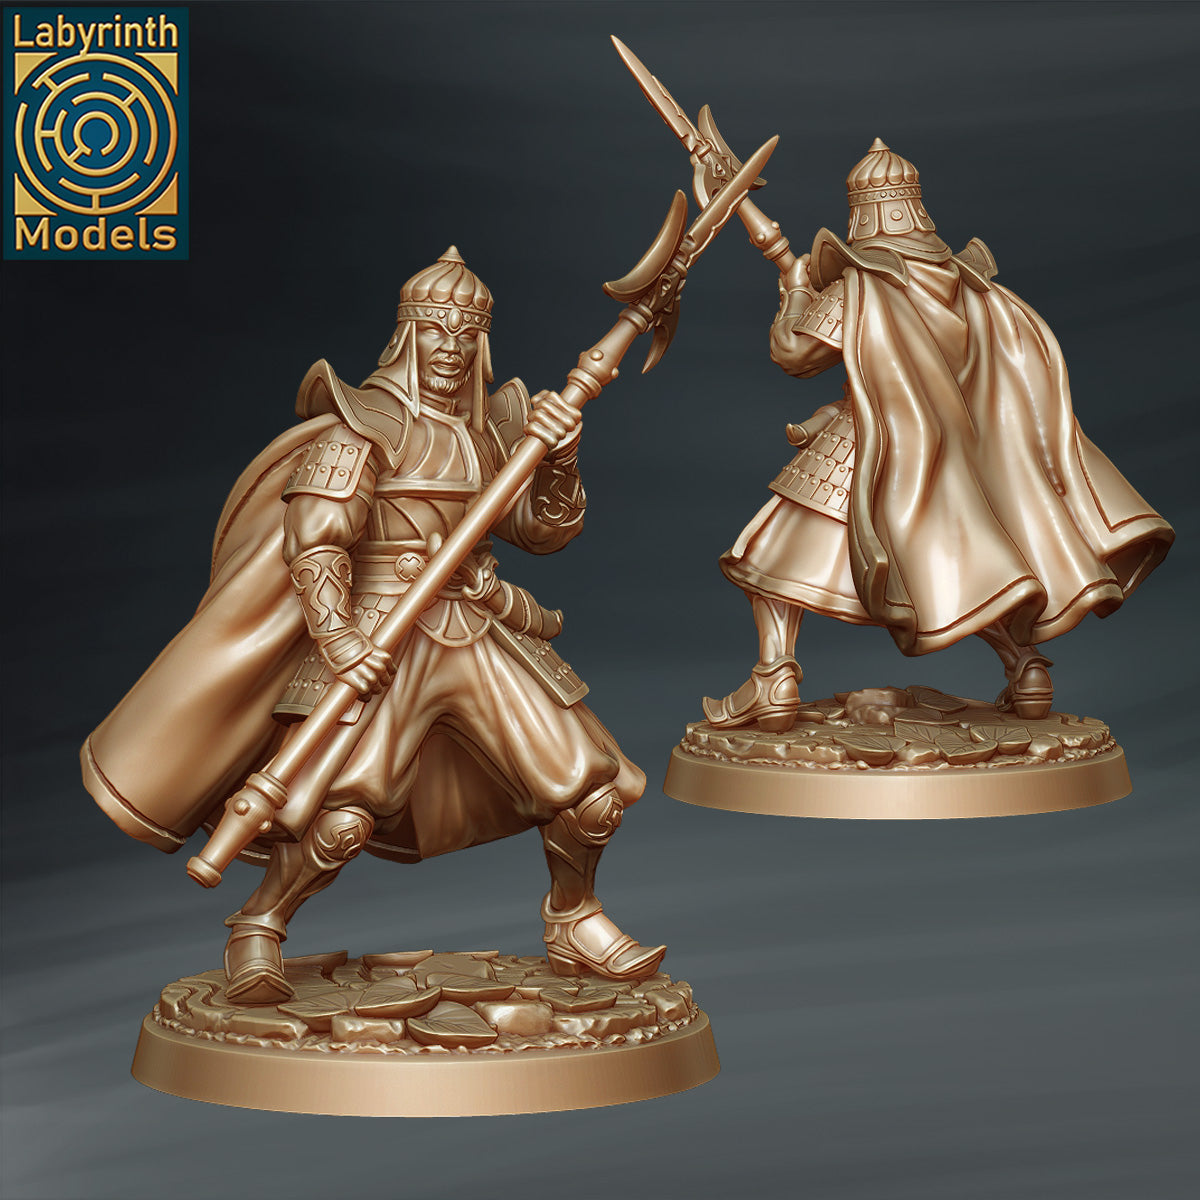 Sultan Guards by Labyrinth Models